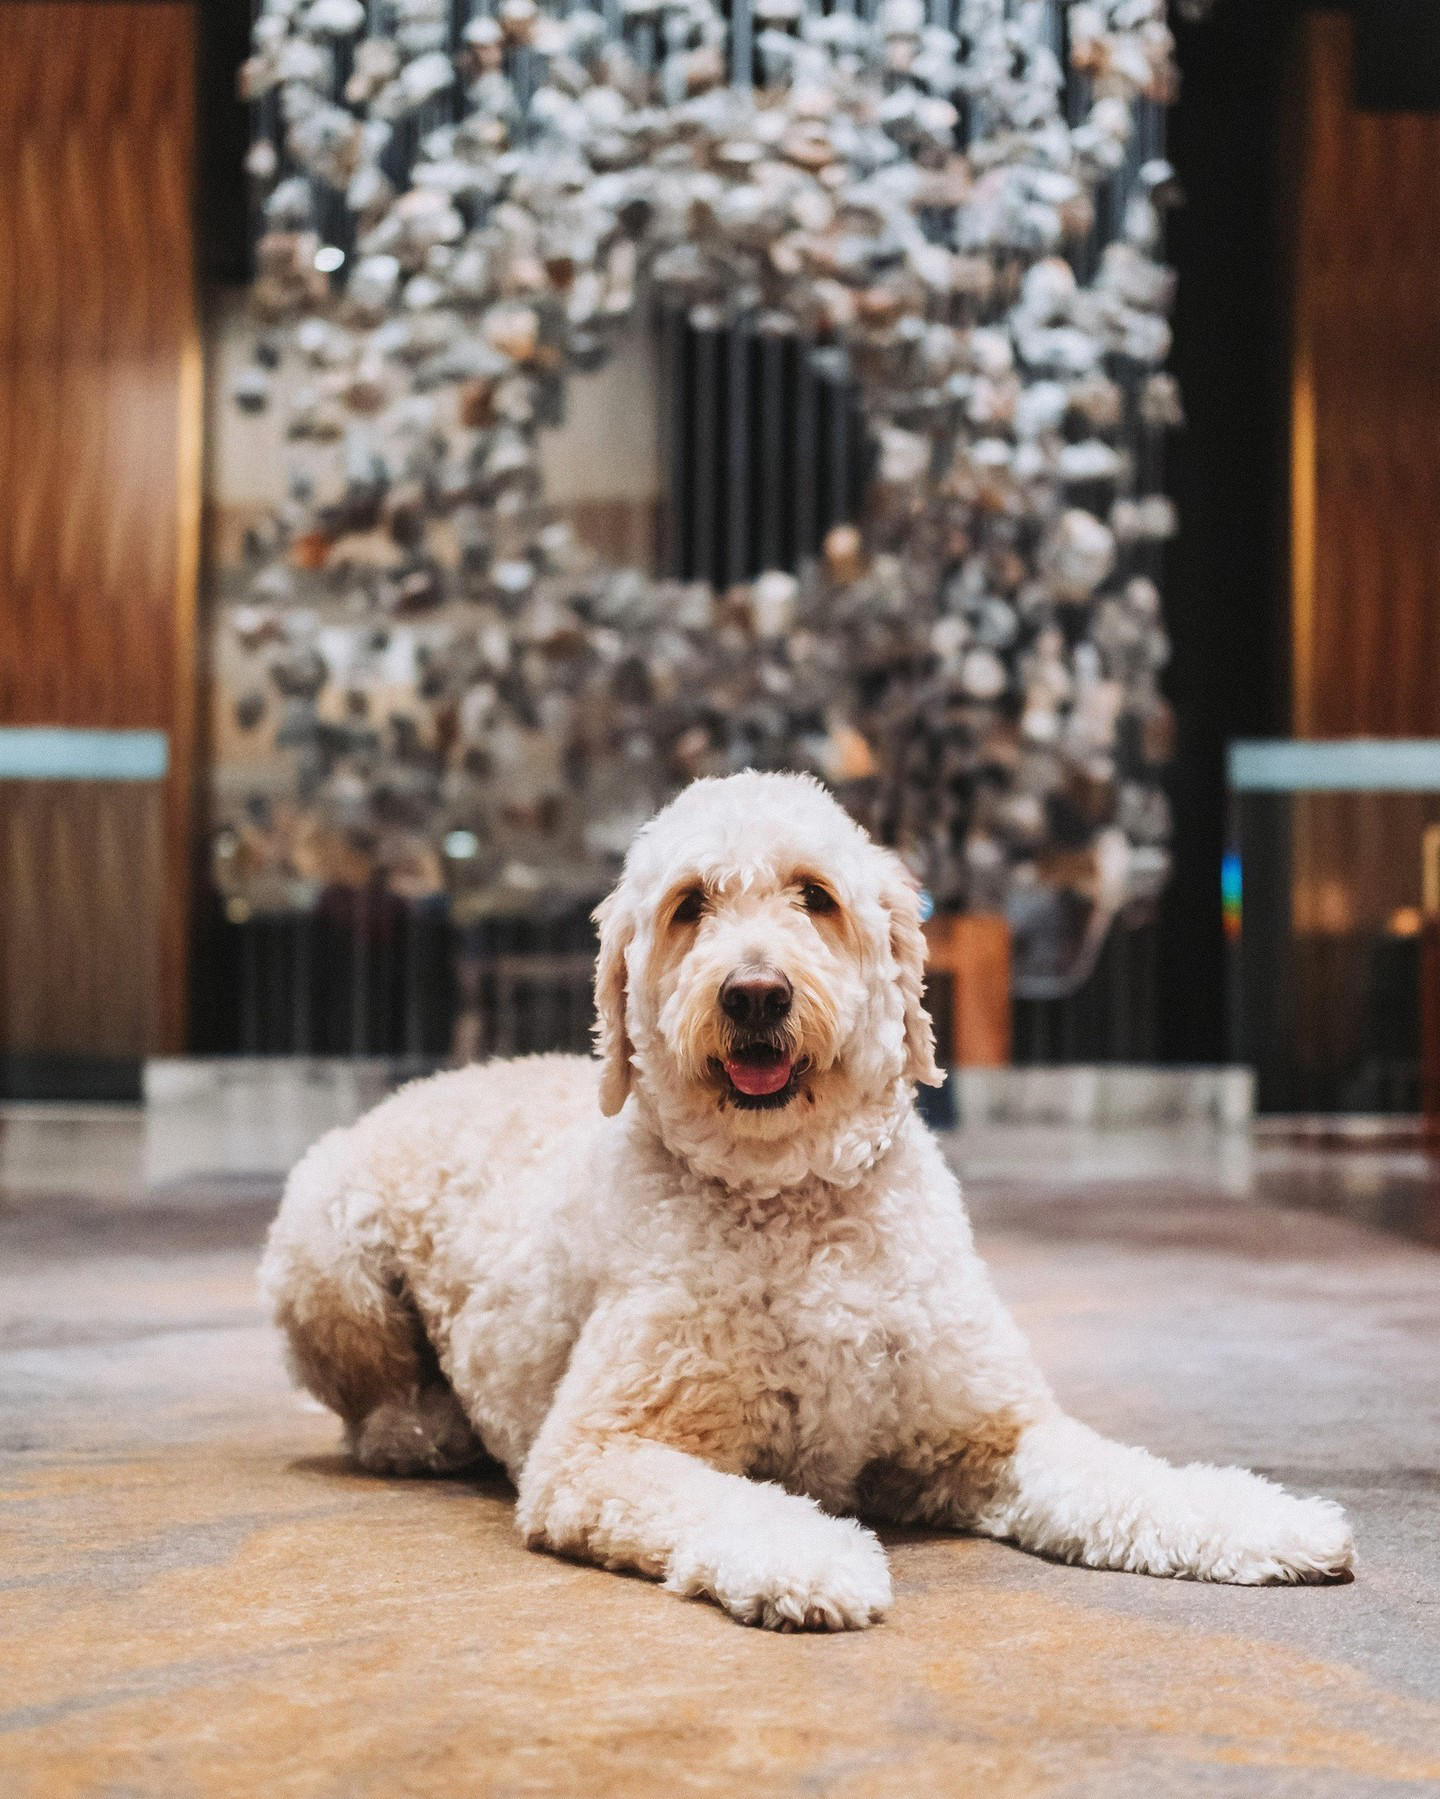 image  1 Delano Las Vegas - Treat yourself and your pup to a vacation